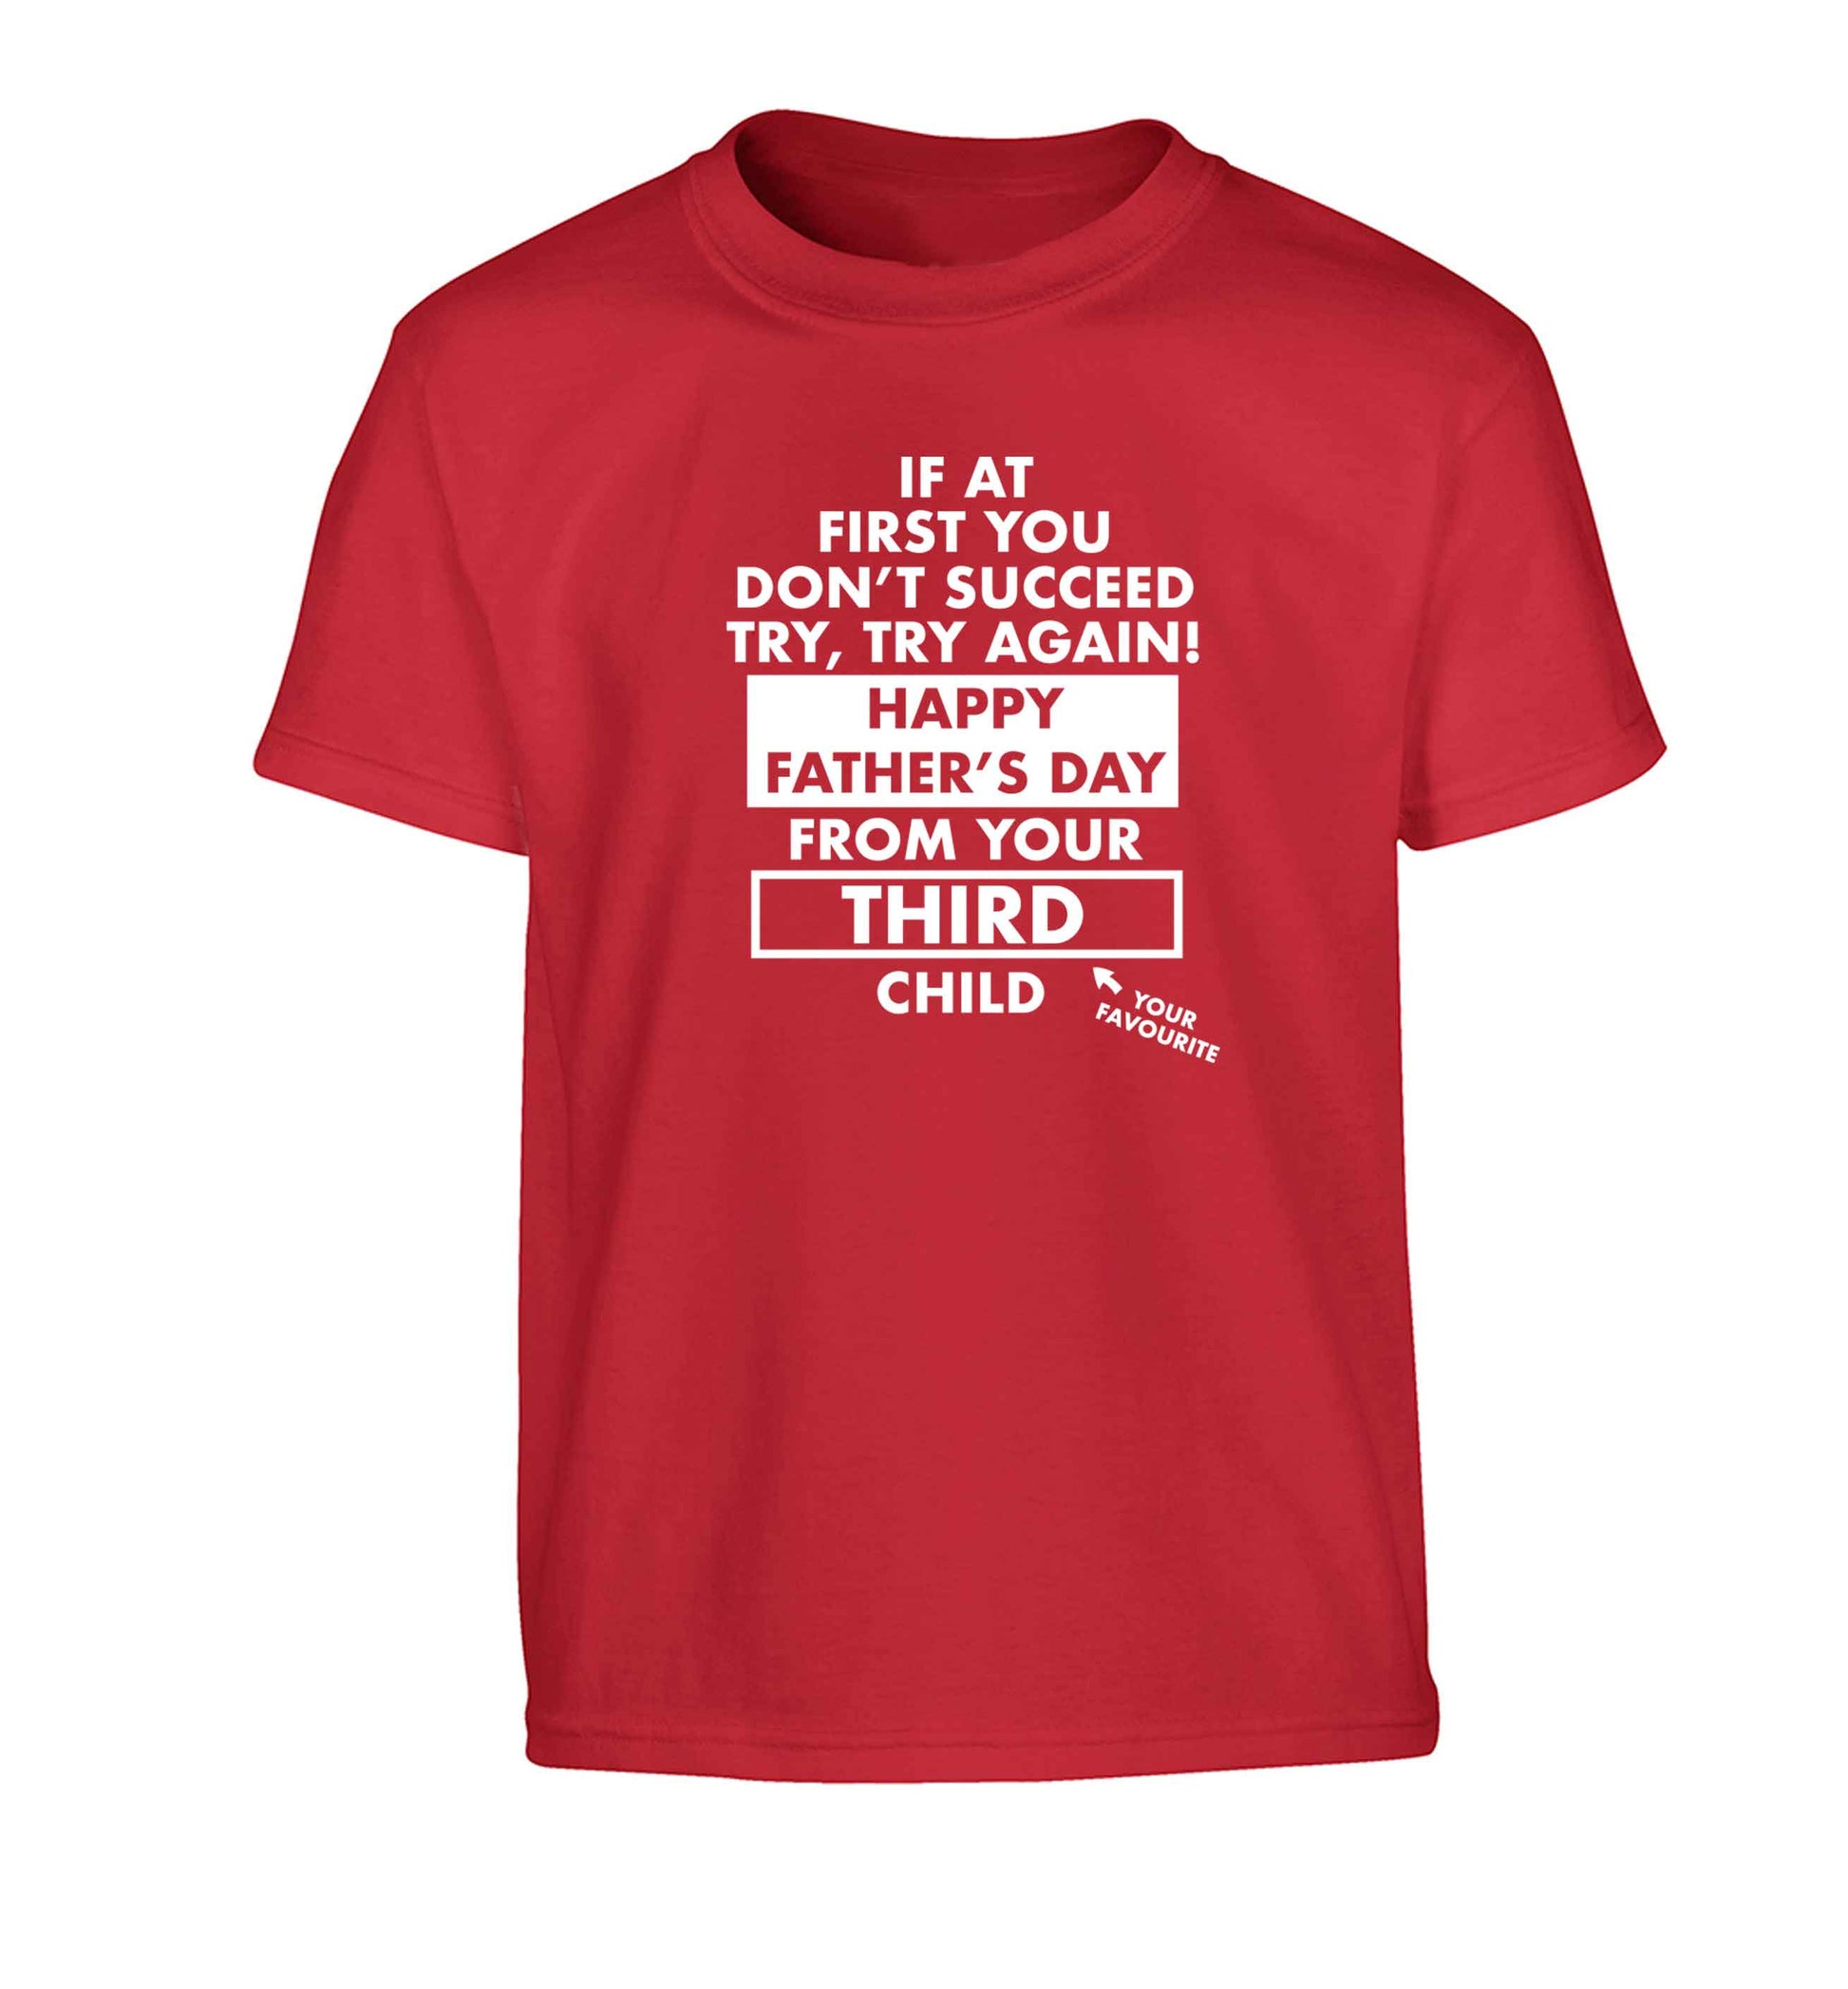 If at first you don't succeed try, try again Happy Father's day from your third child! Children's red Tshirt 12-13 Years